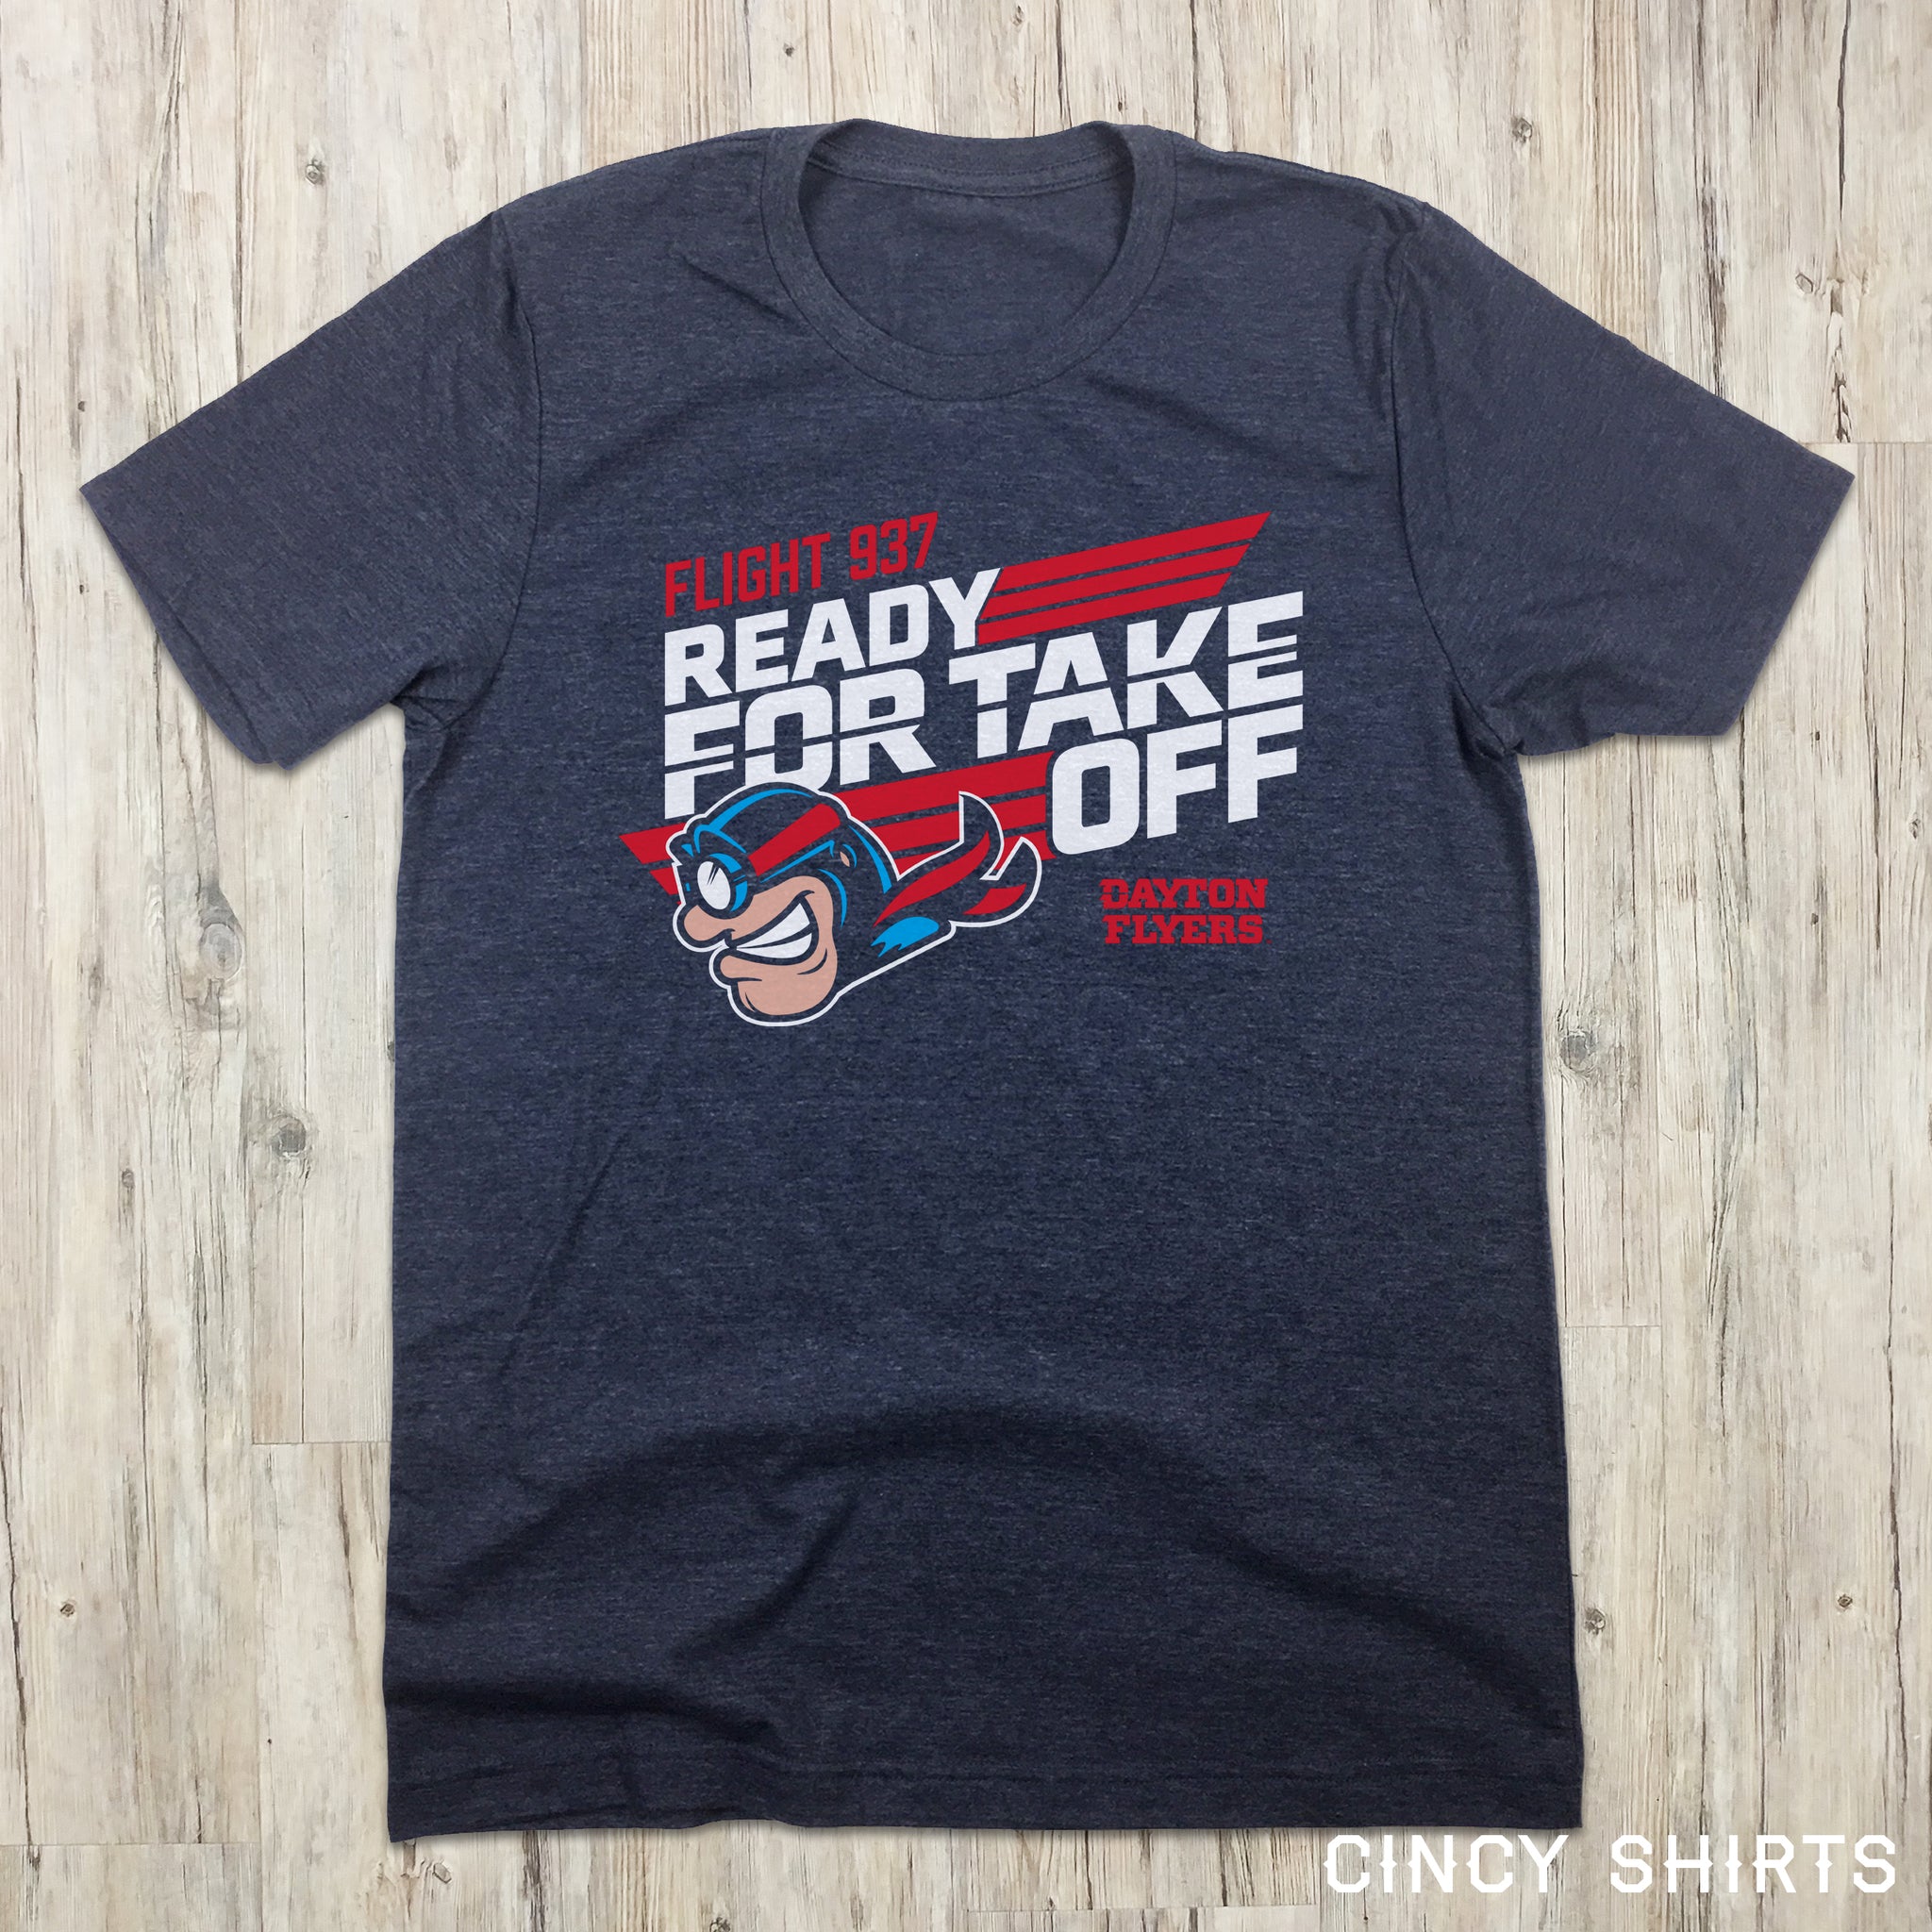 Ready For Take Off - Rudy Flyer | Cincy Shirts